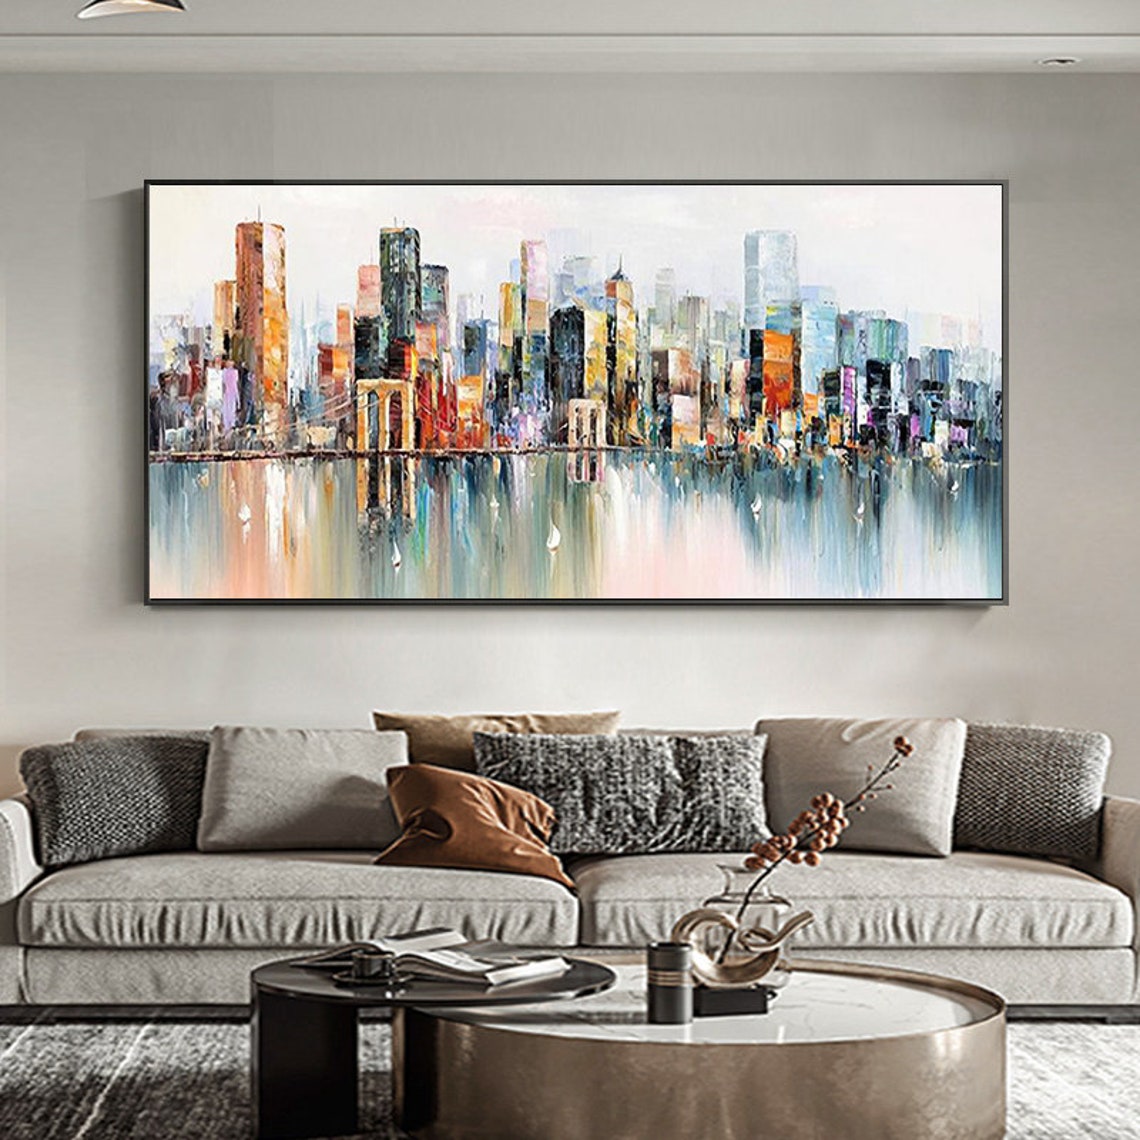 Abstract Cityscape Oil Painting Large Original Colorful Urban | Etsy